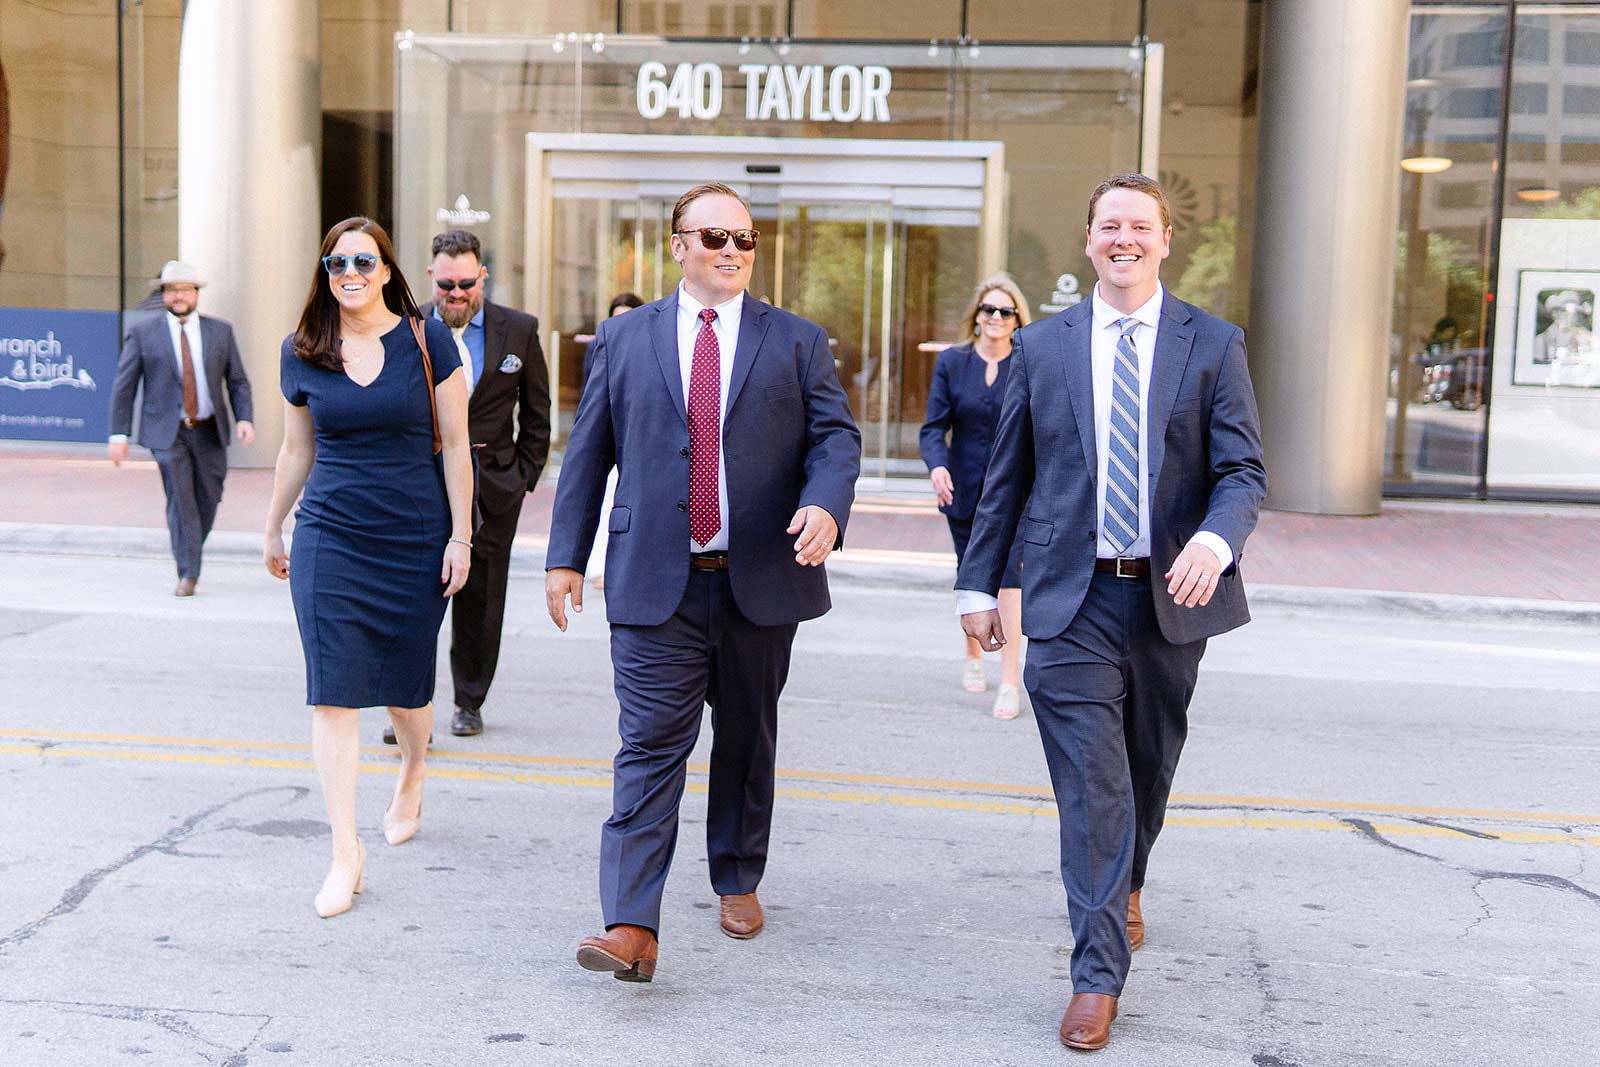 Image of attorneys and staff walking across the street in front of the office.